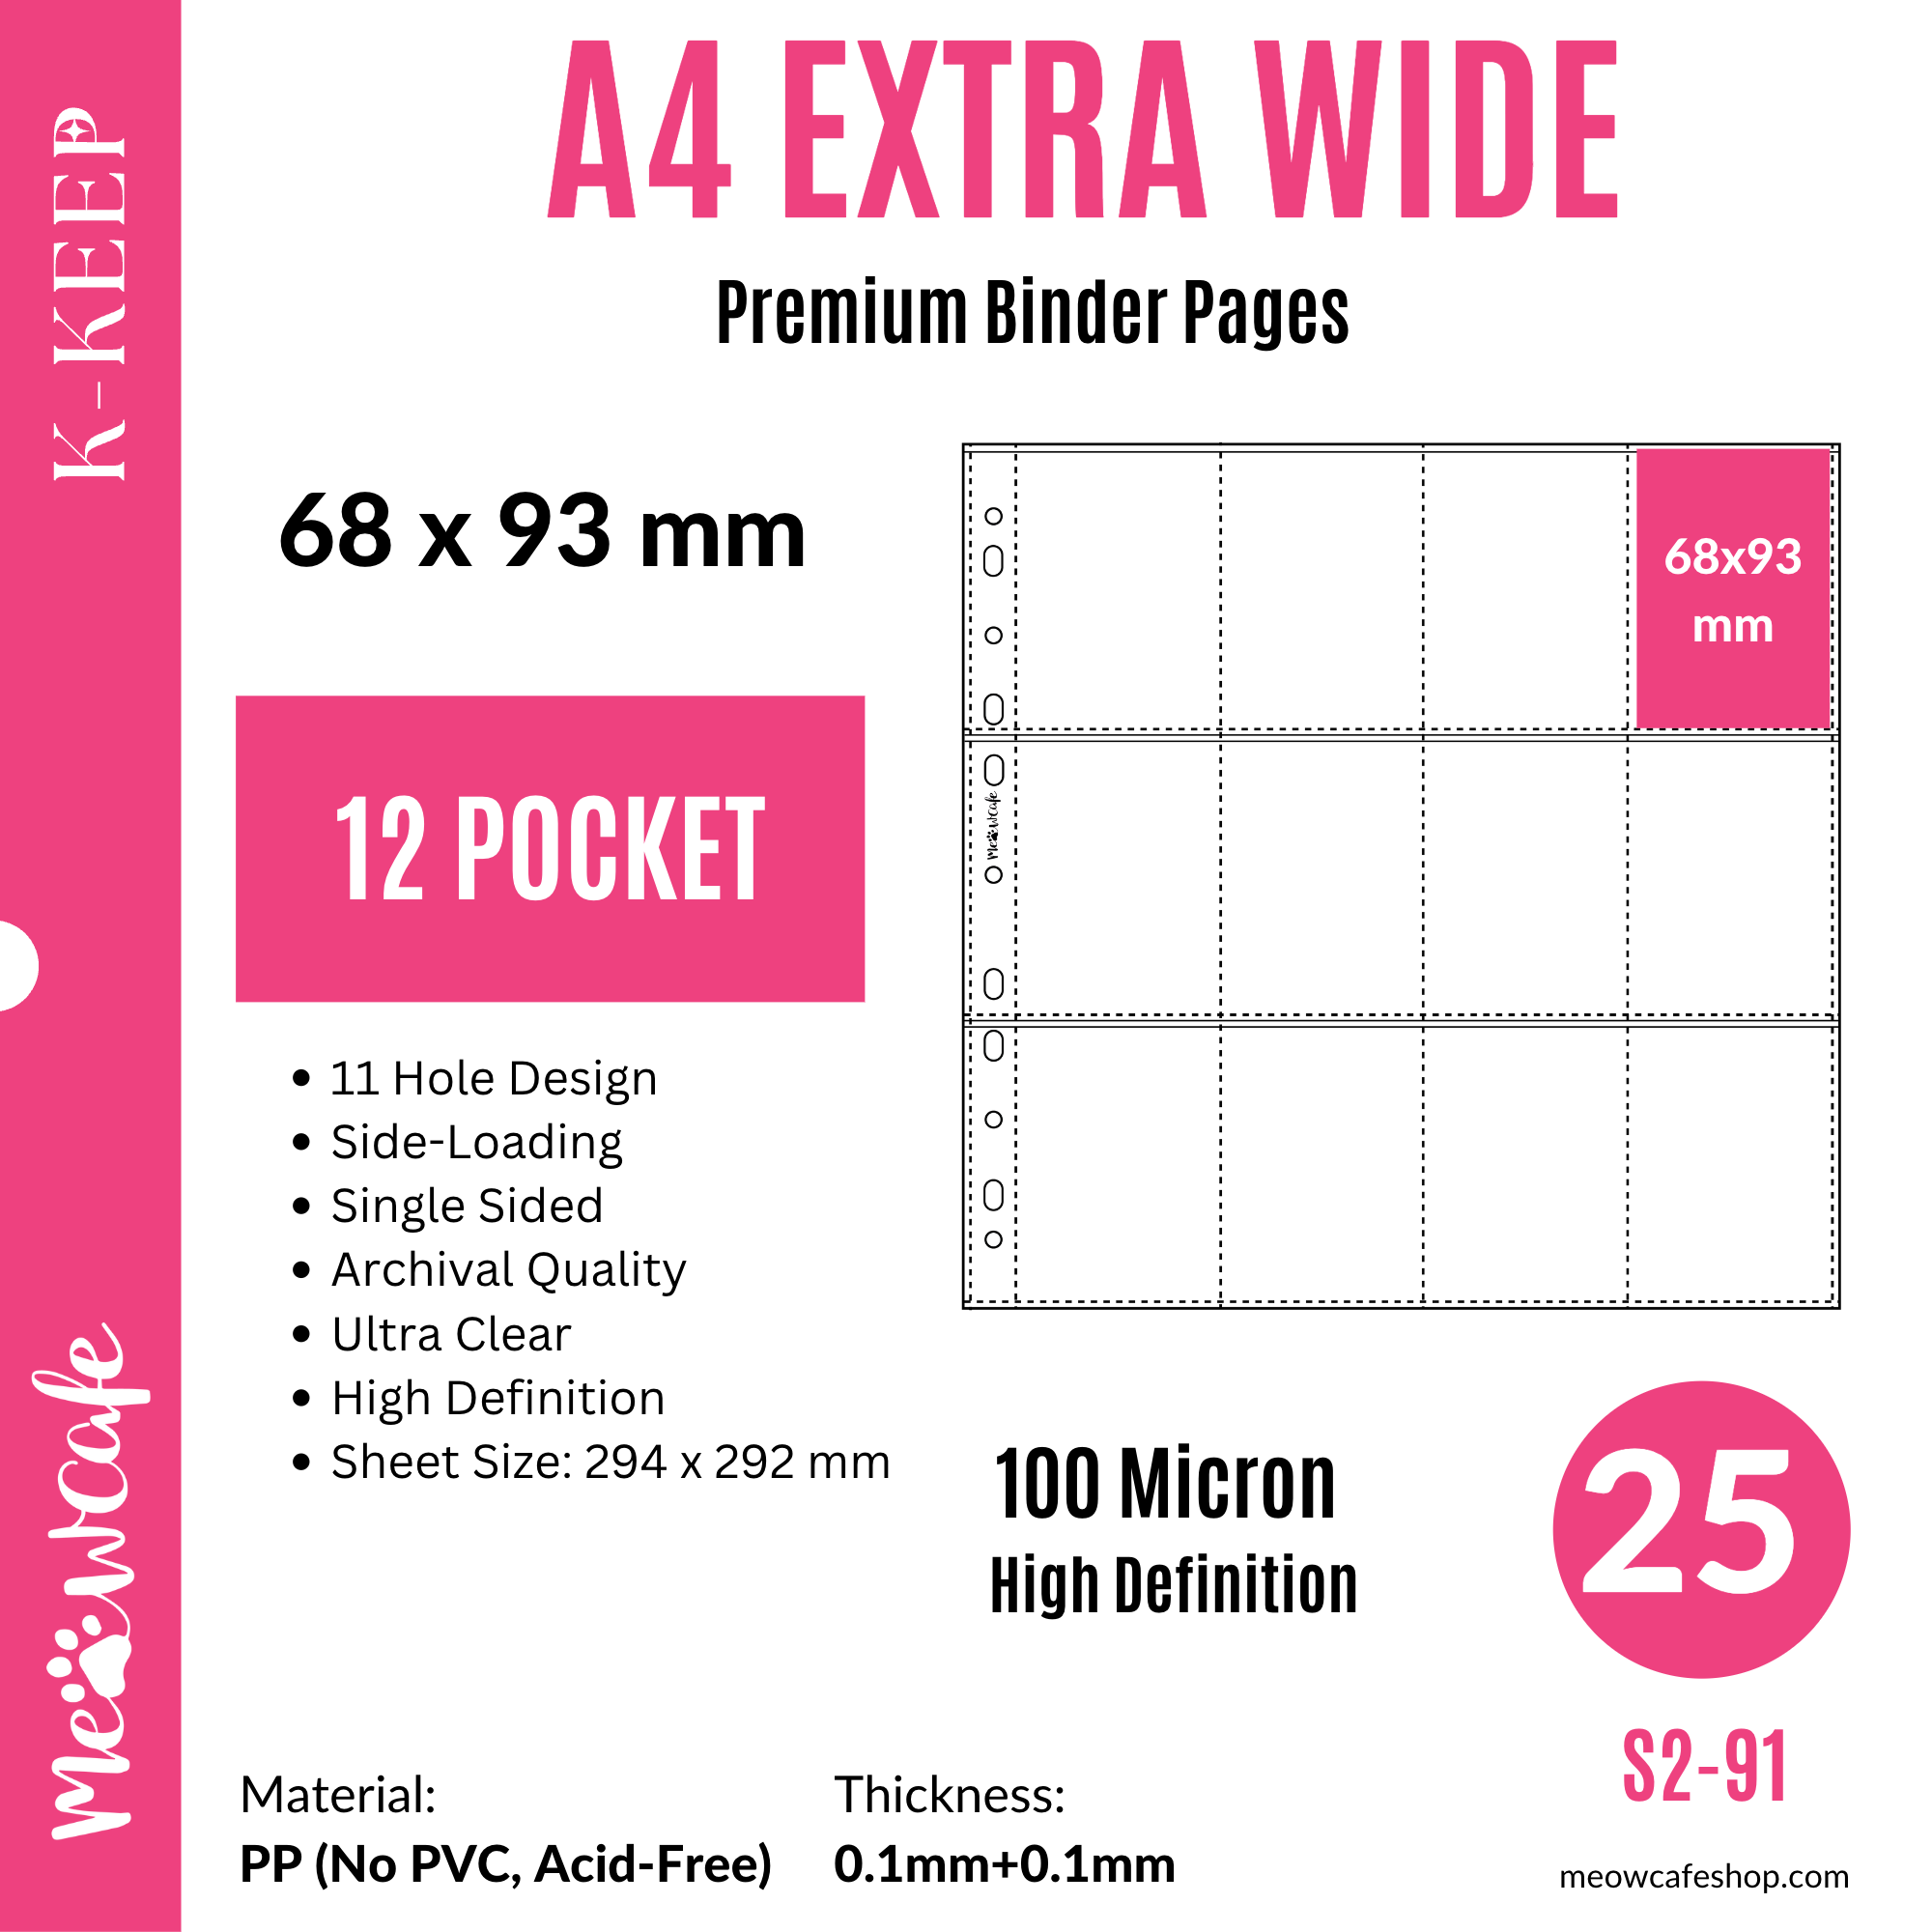 K-KEEP [A4 Extra-Wide] -  12 Pocket (68x93mm) 66x91 Double Sleeve Perfect Fit- 11 Holes Premium Binder Pages, 100 Micron Thick, High Definition (Pack of 25) - (S2-91)